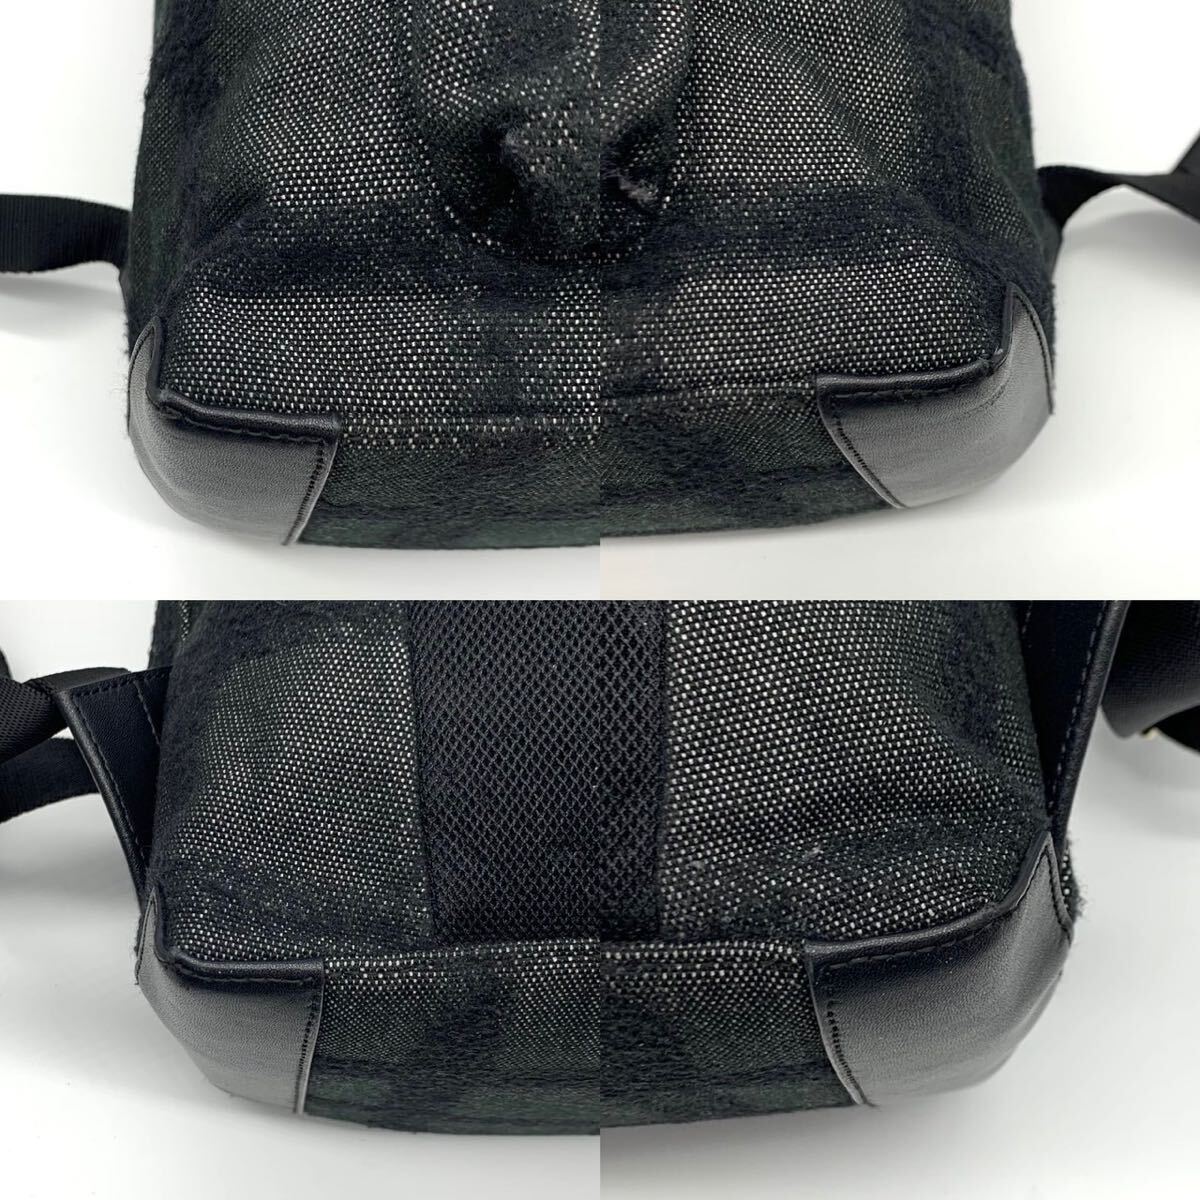 1 jpy * new goods same ./ regular price 8 ten thousand *Paul Smith Paul Smith check pattern backpack rucksack business bag A4* leather black men's 